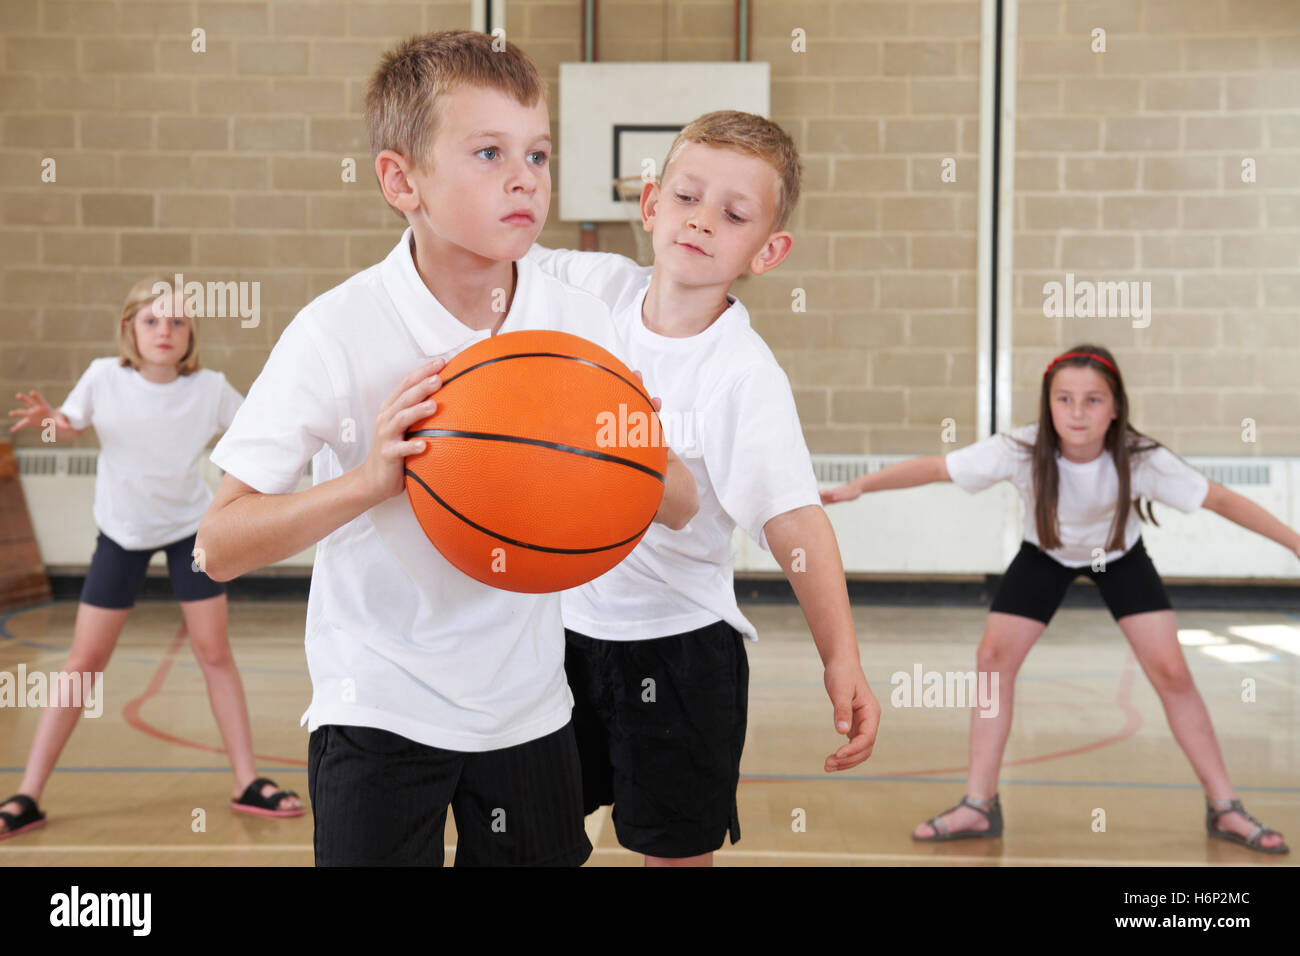 Elementary School Pupils Playing Basketball In Gym Stock Photo